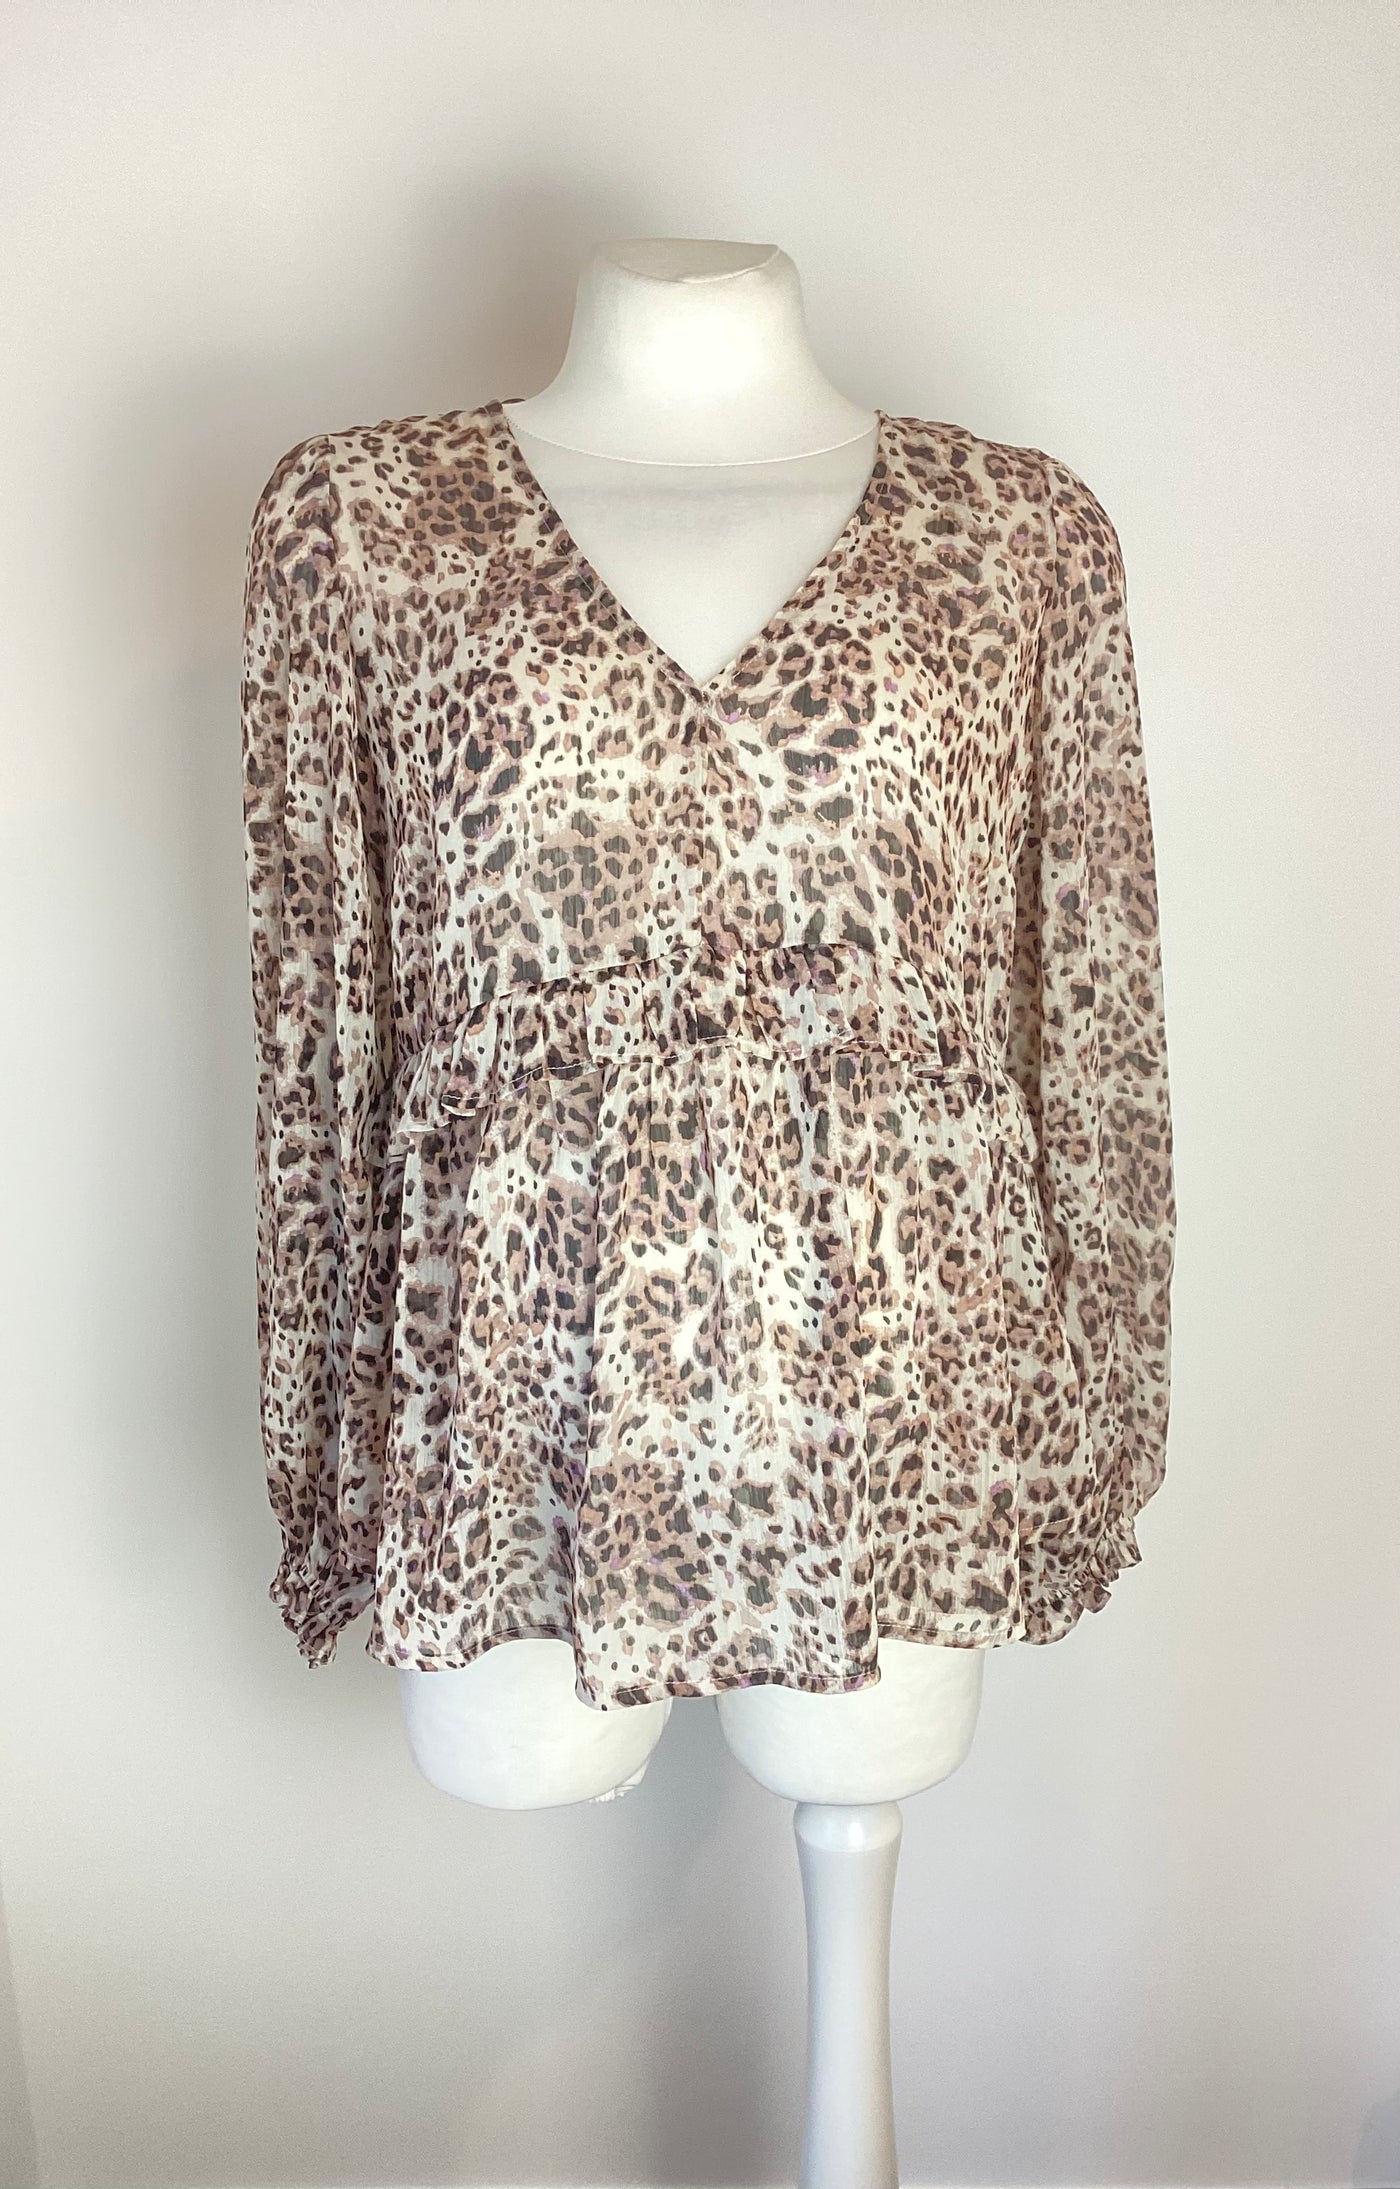 New Look Maternity leopard print long sleeved sheer top - Size 8 (would fit 8/10)